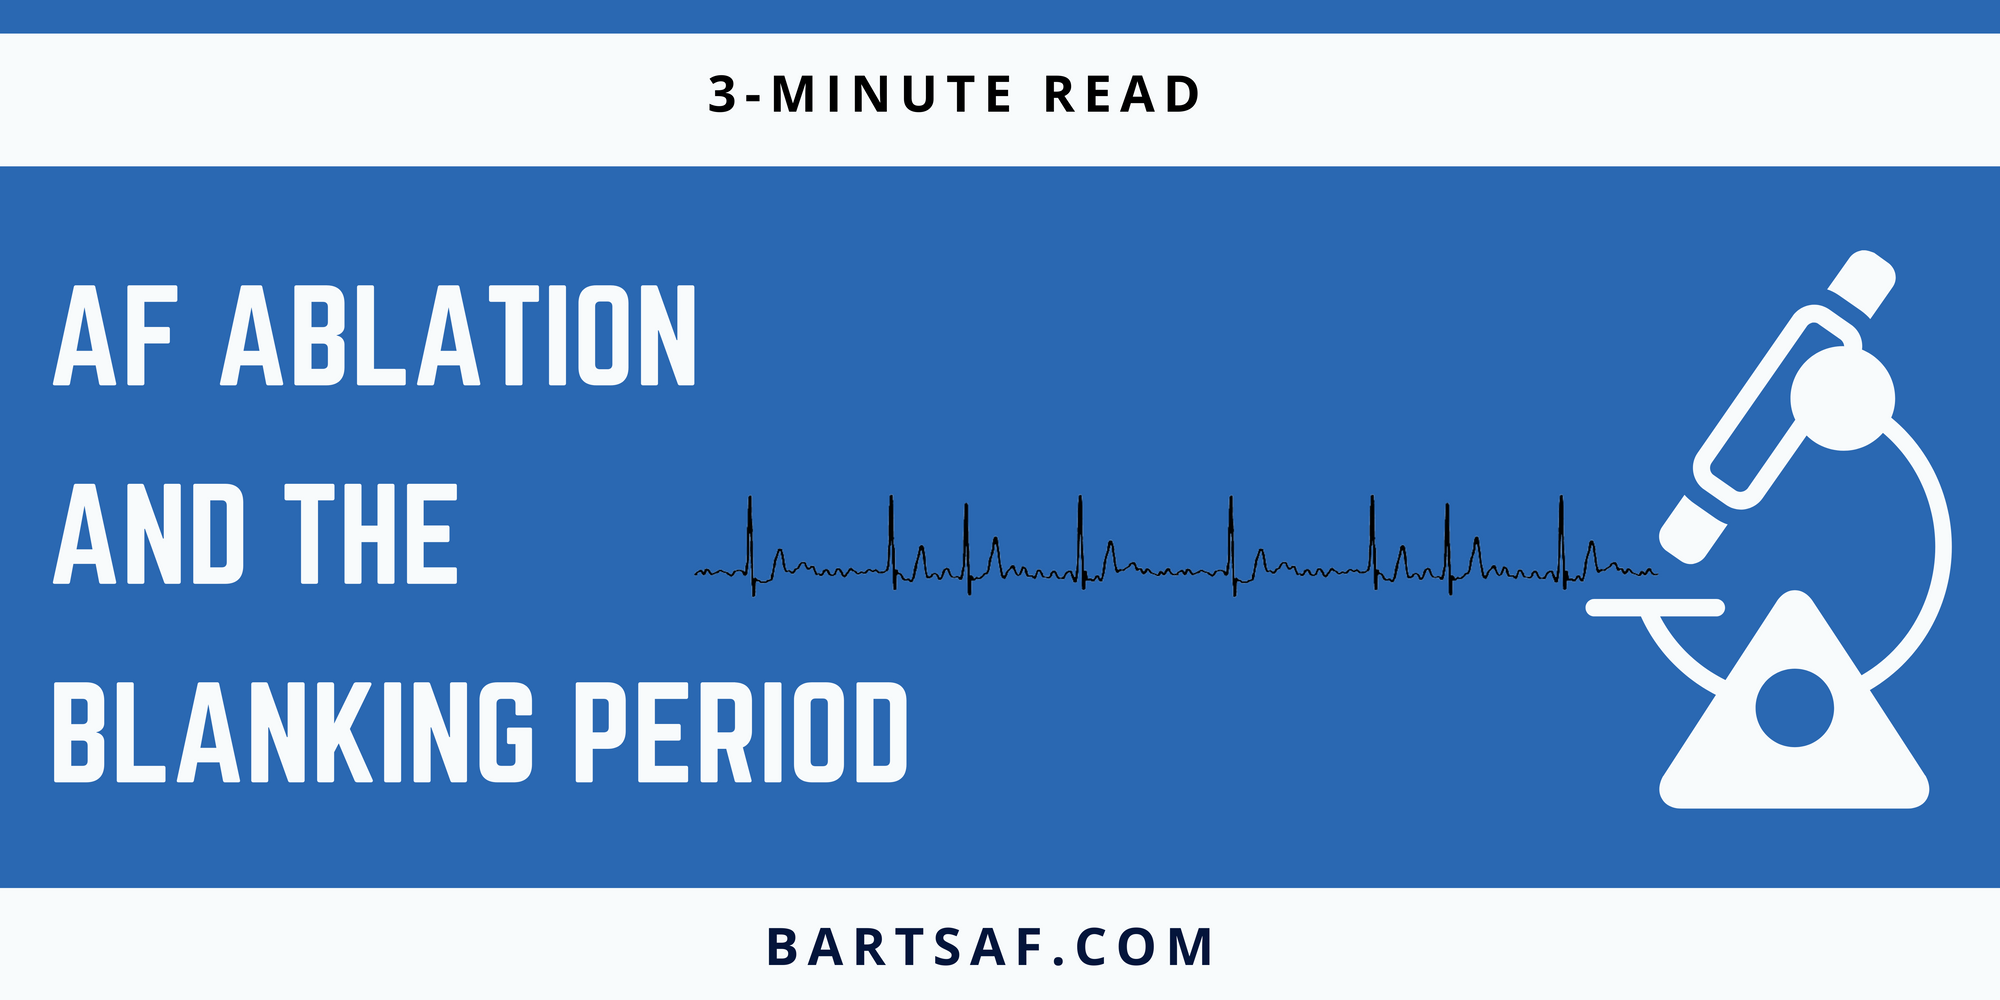 AF ablation and the blanking period